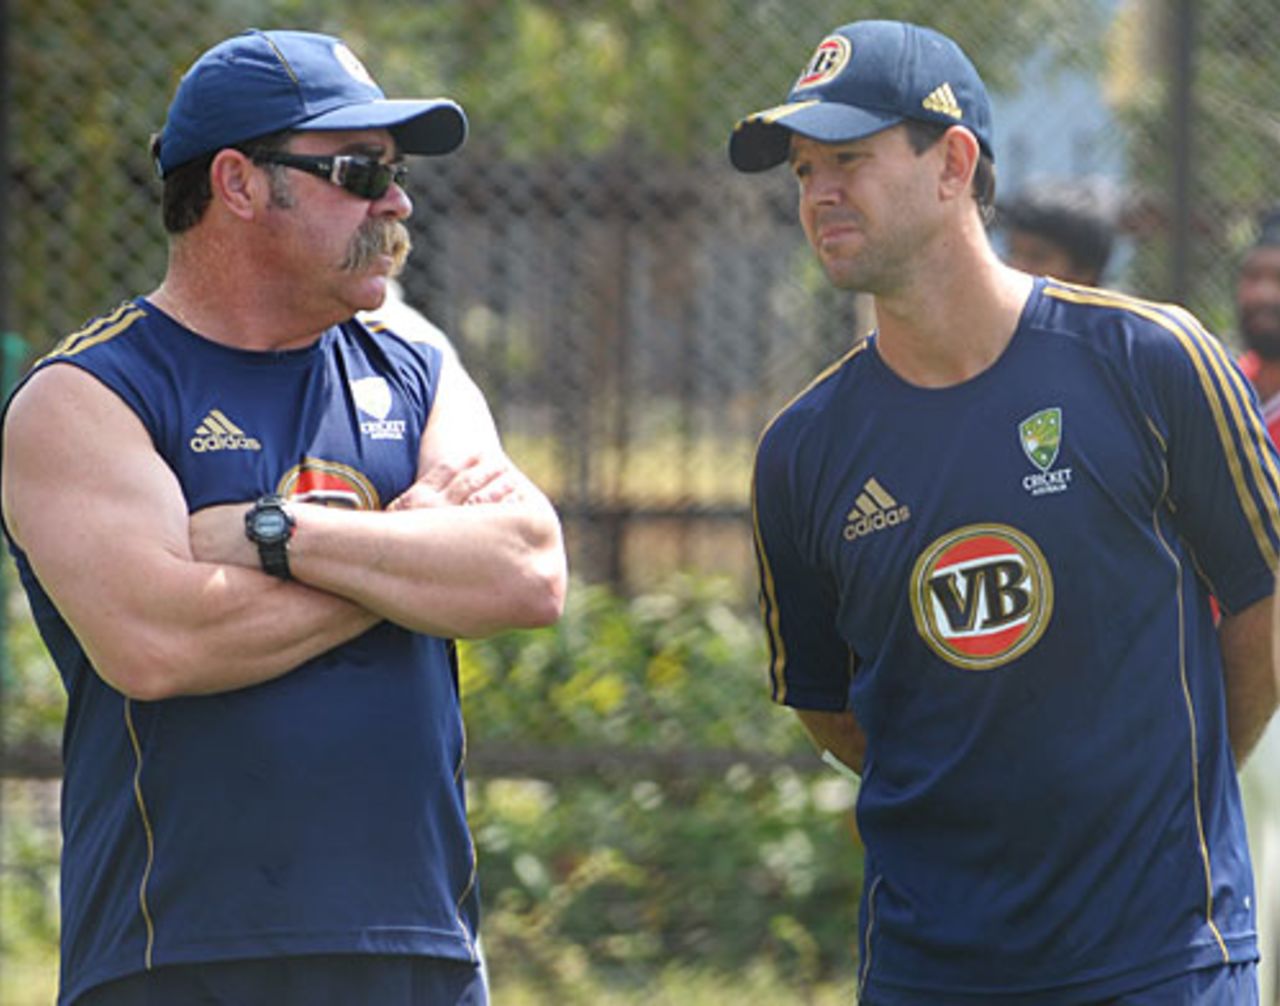 David Boon and Ricky Ponting deep in discussion, Hyderabad, November 4, 2009